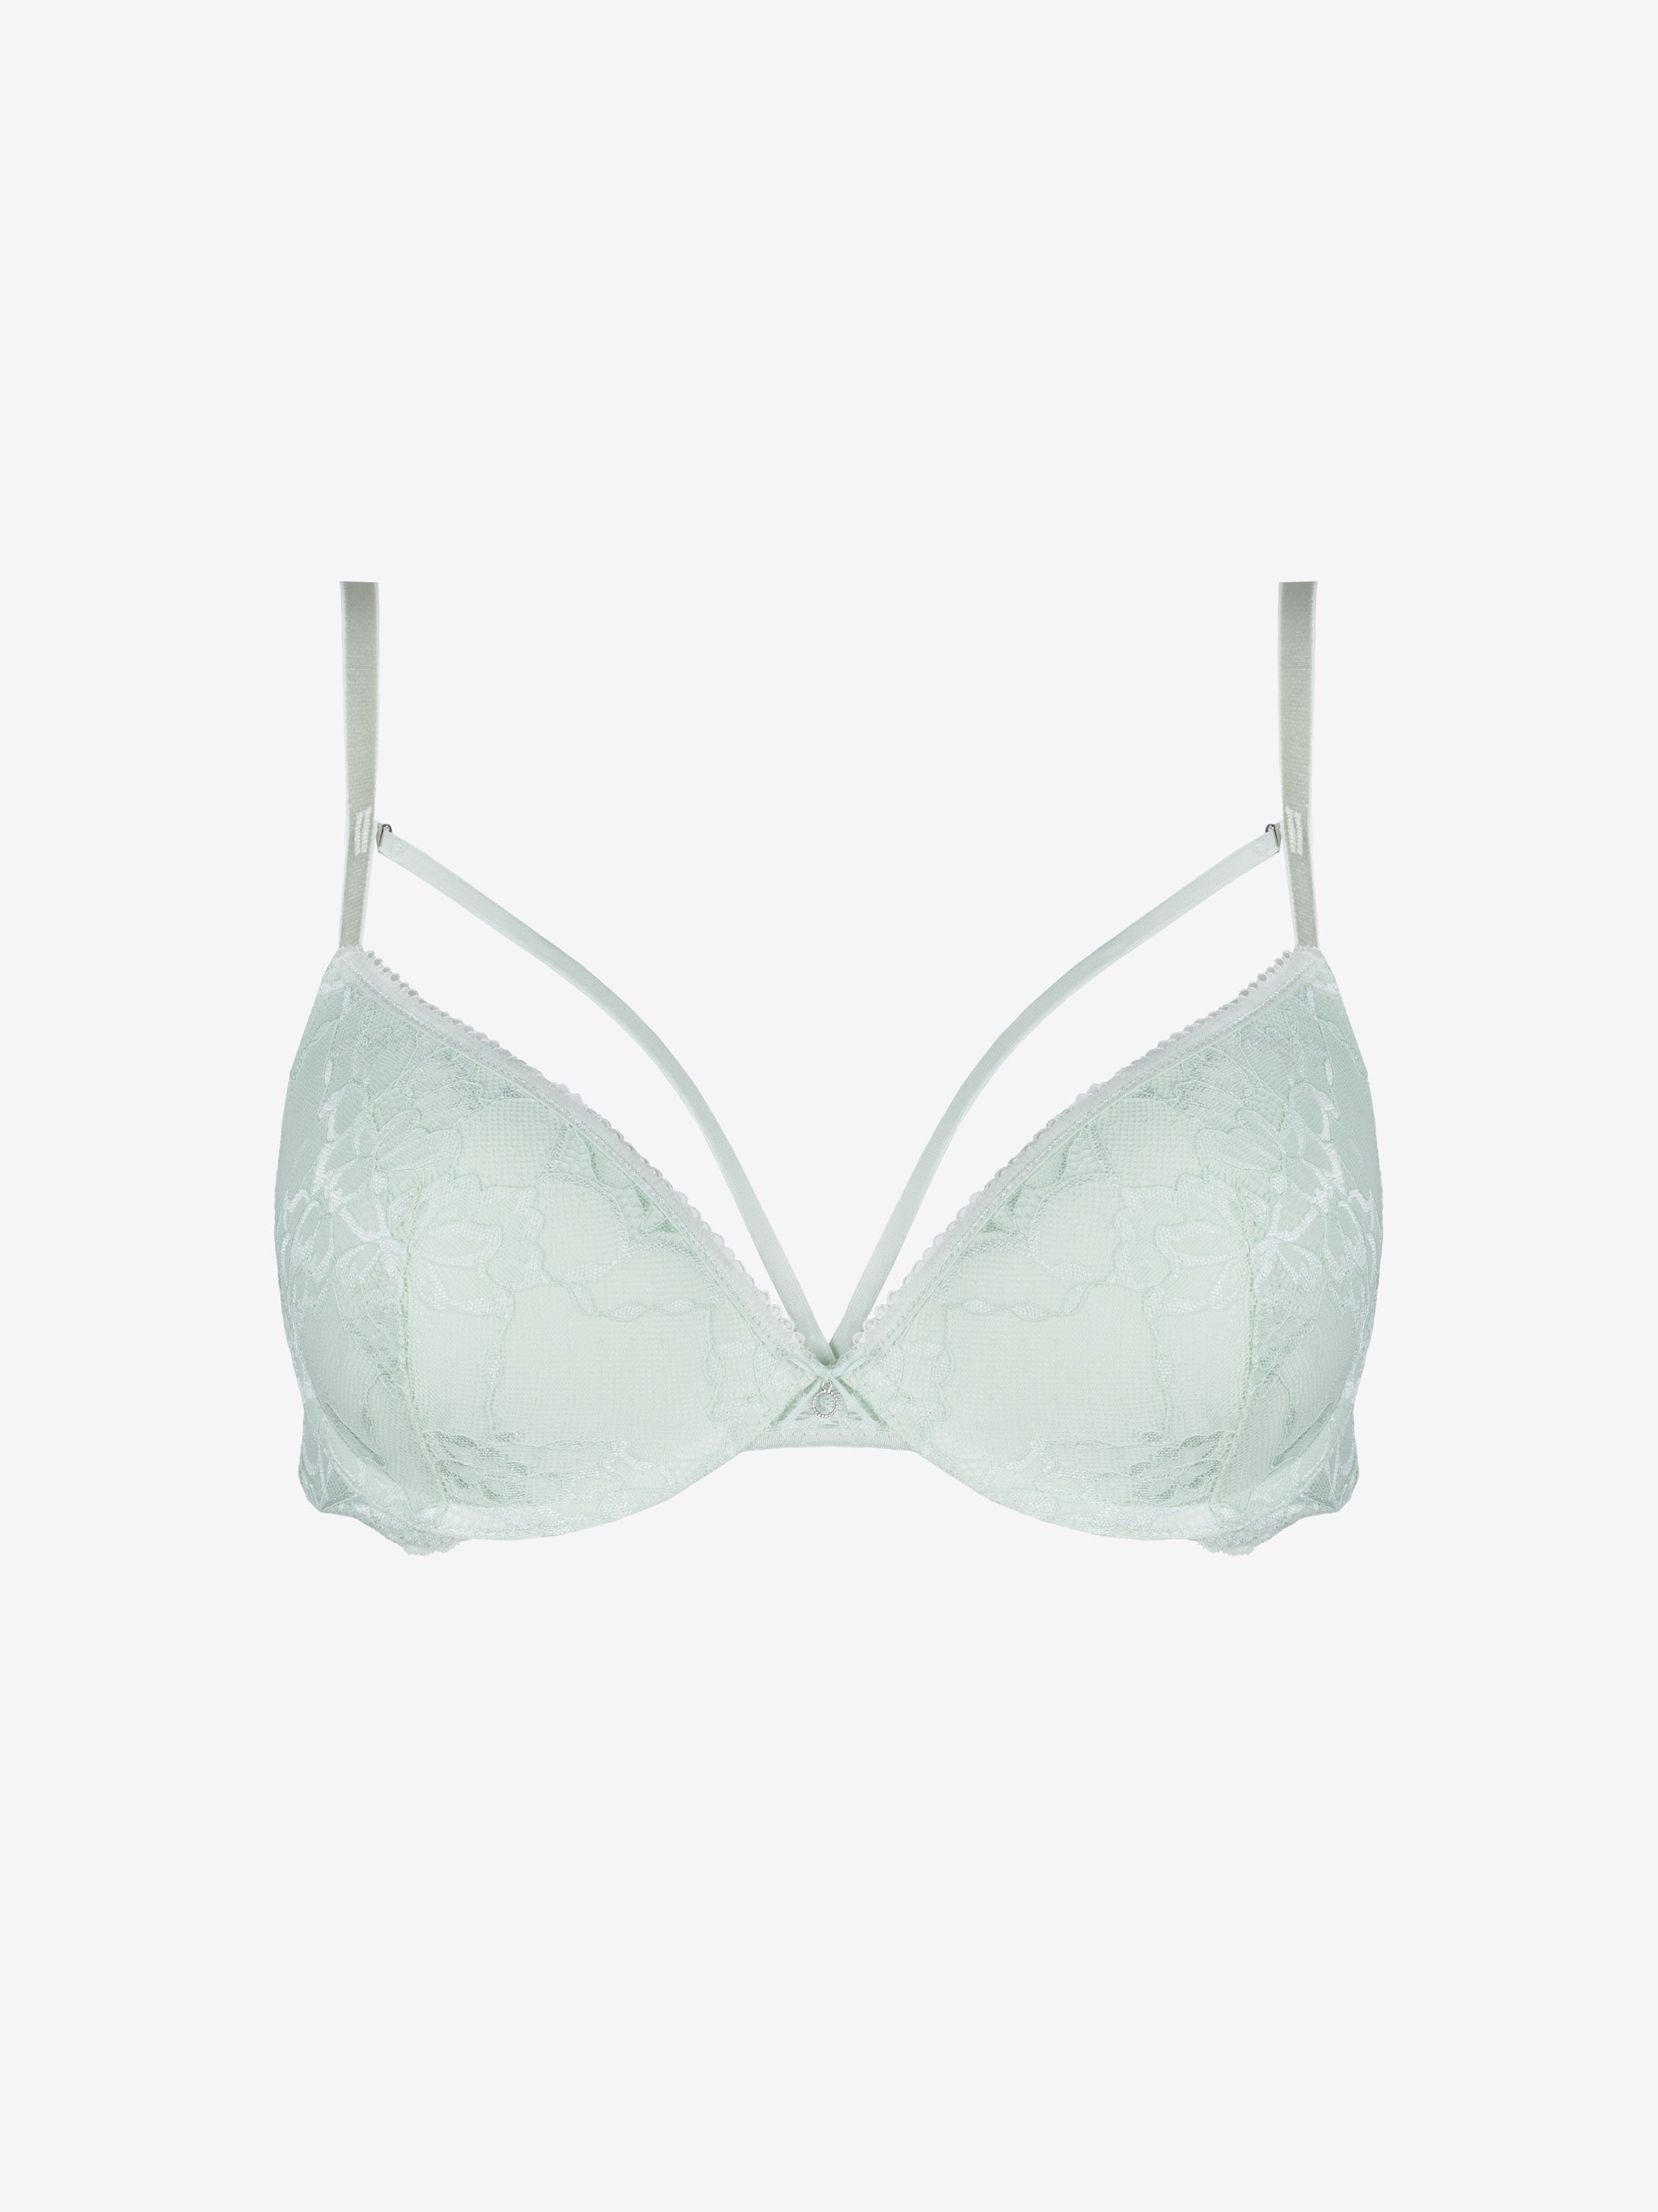 Target Push-up Bra Green Size 32 B - $16 - From amber